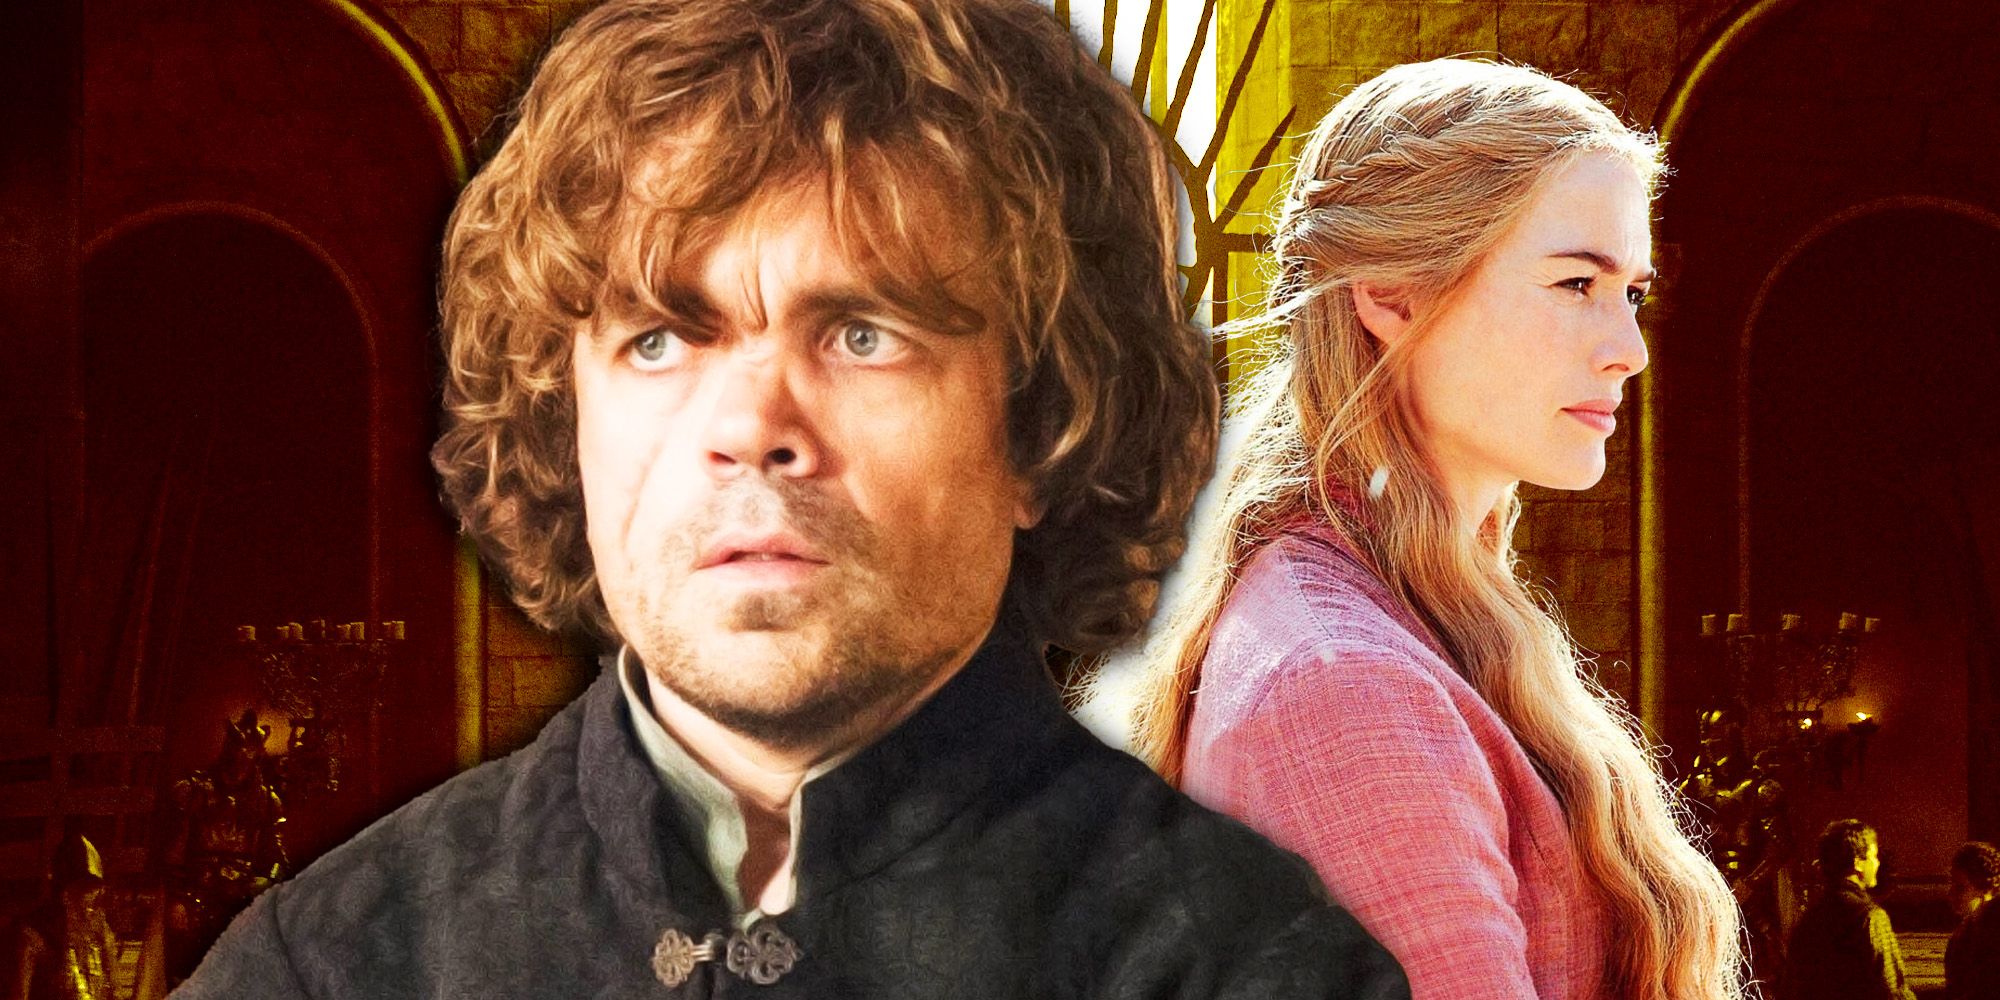 Tyrion Lannister from his trial scenes in season 4, and a shot of Cersei from season 1